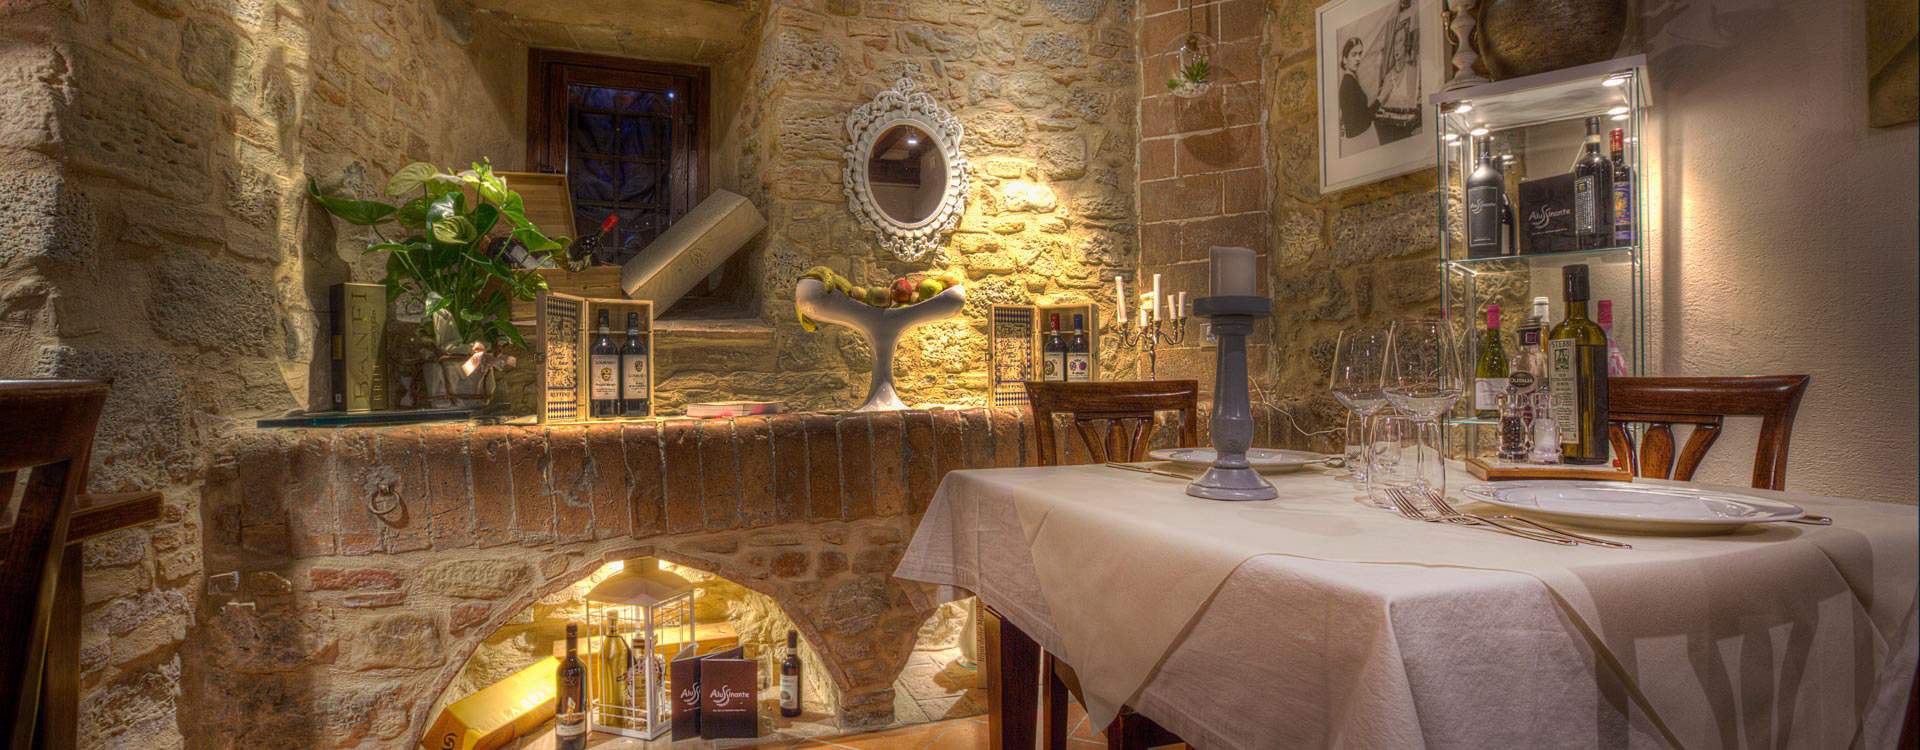 Hotel spa restaurant in Tuscany Casole d'Elsa province of Siena